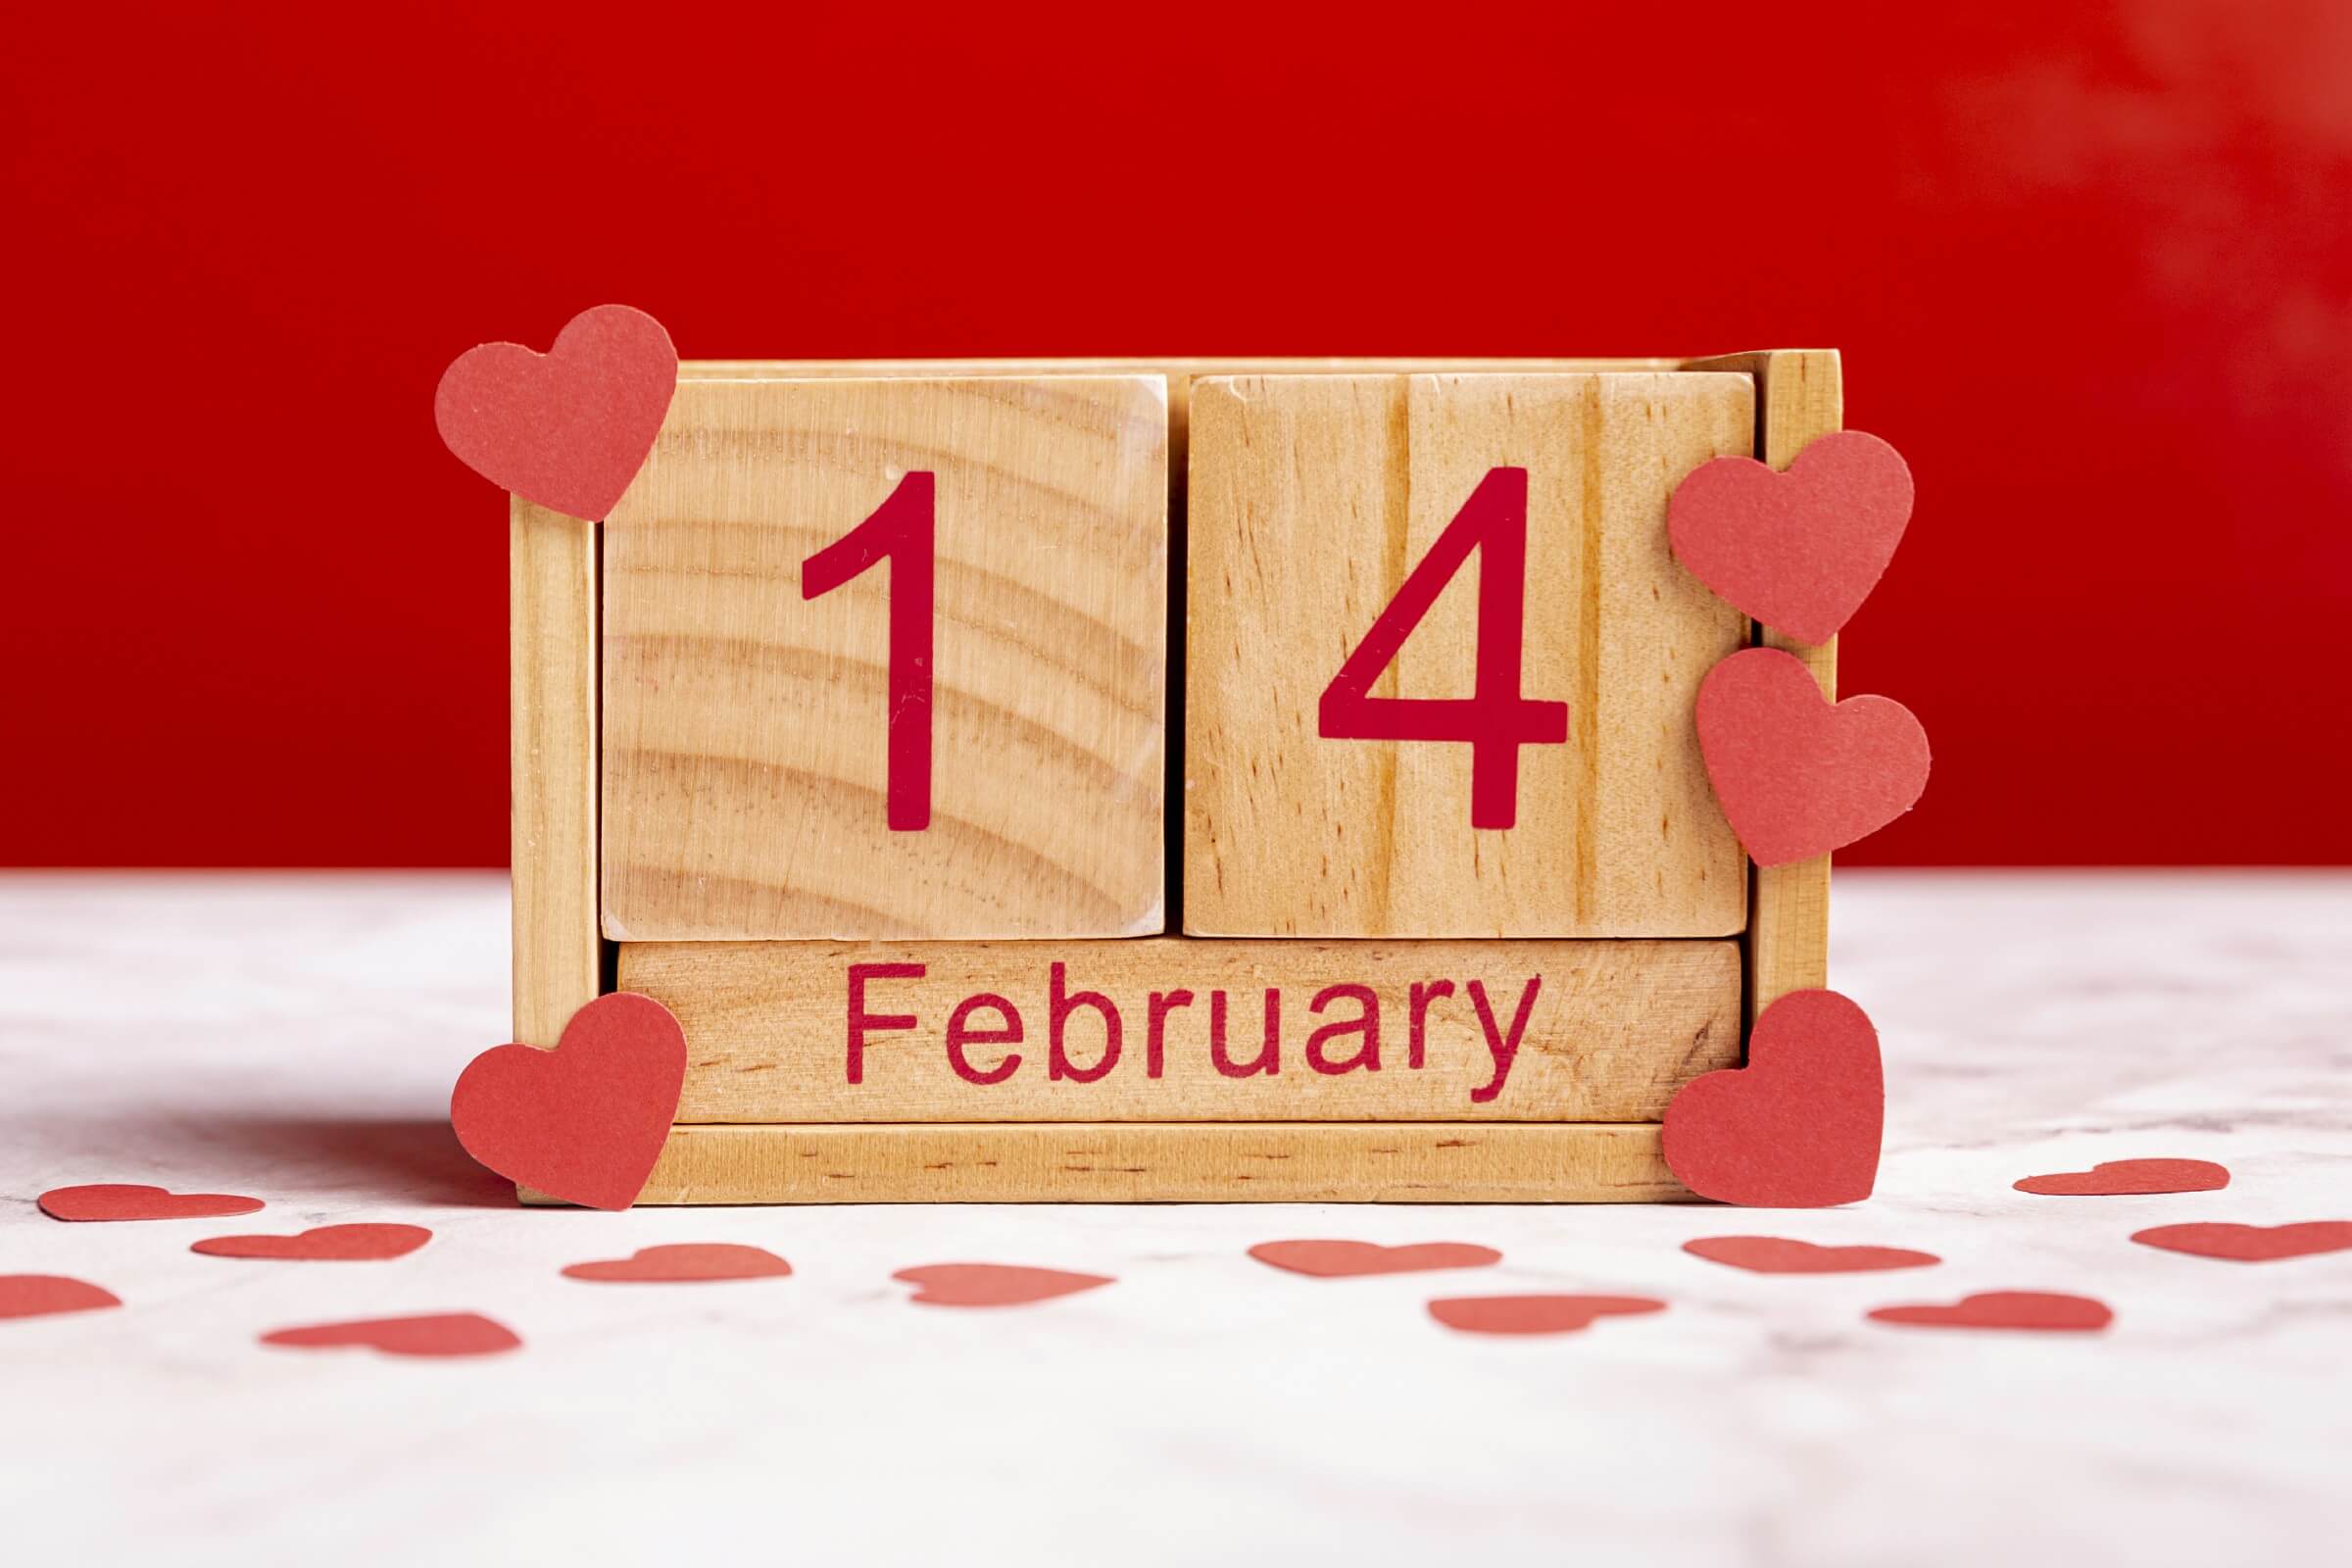 Romantic reminder as valentine's decoration for office